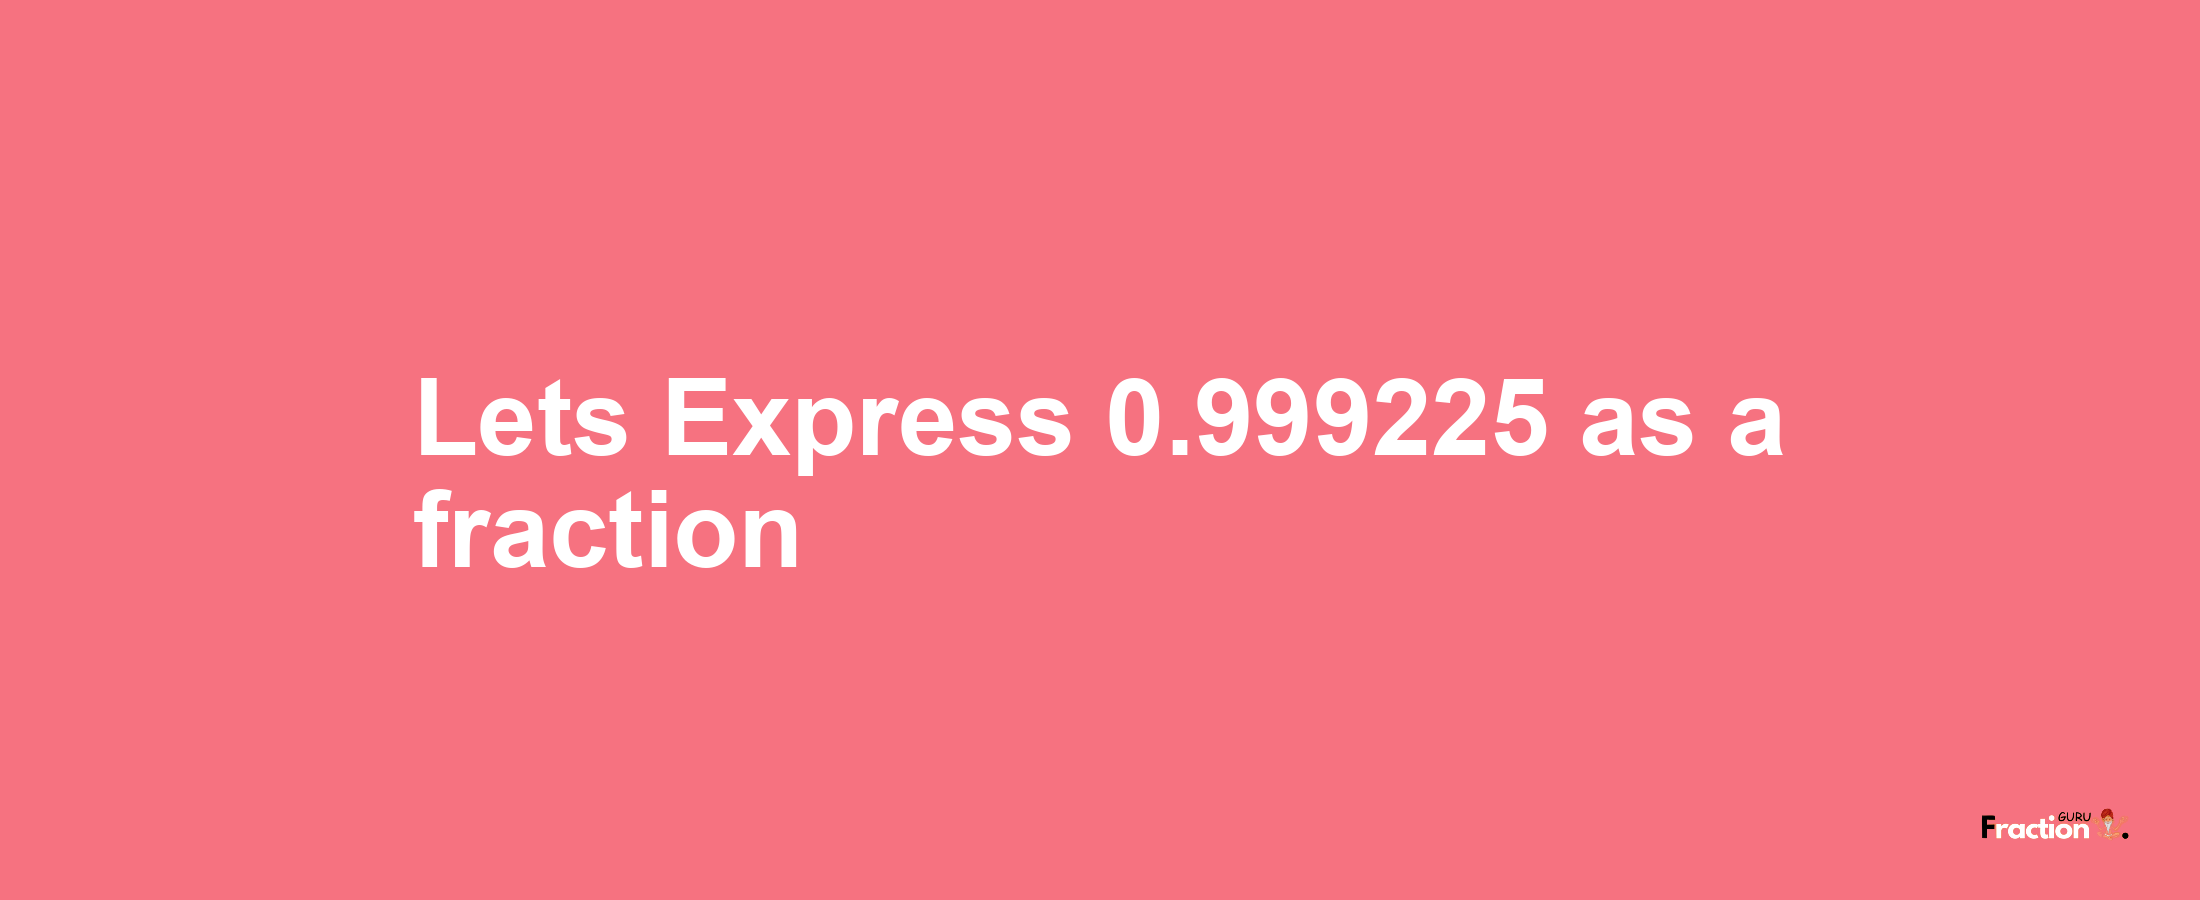 Lets Express 0.999225 as afraction